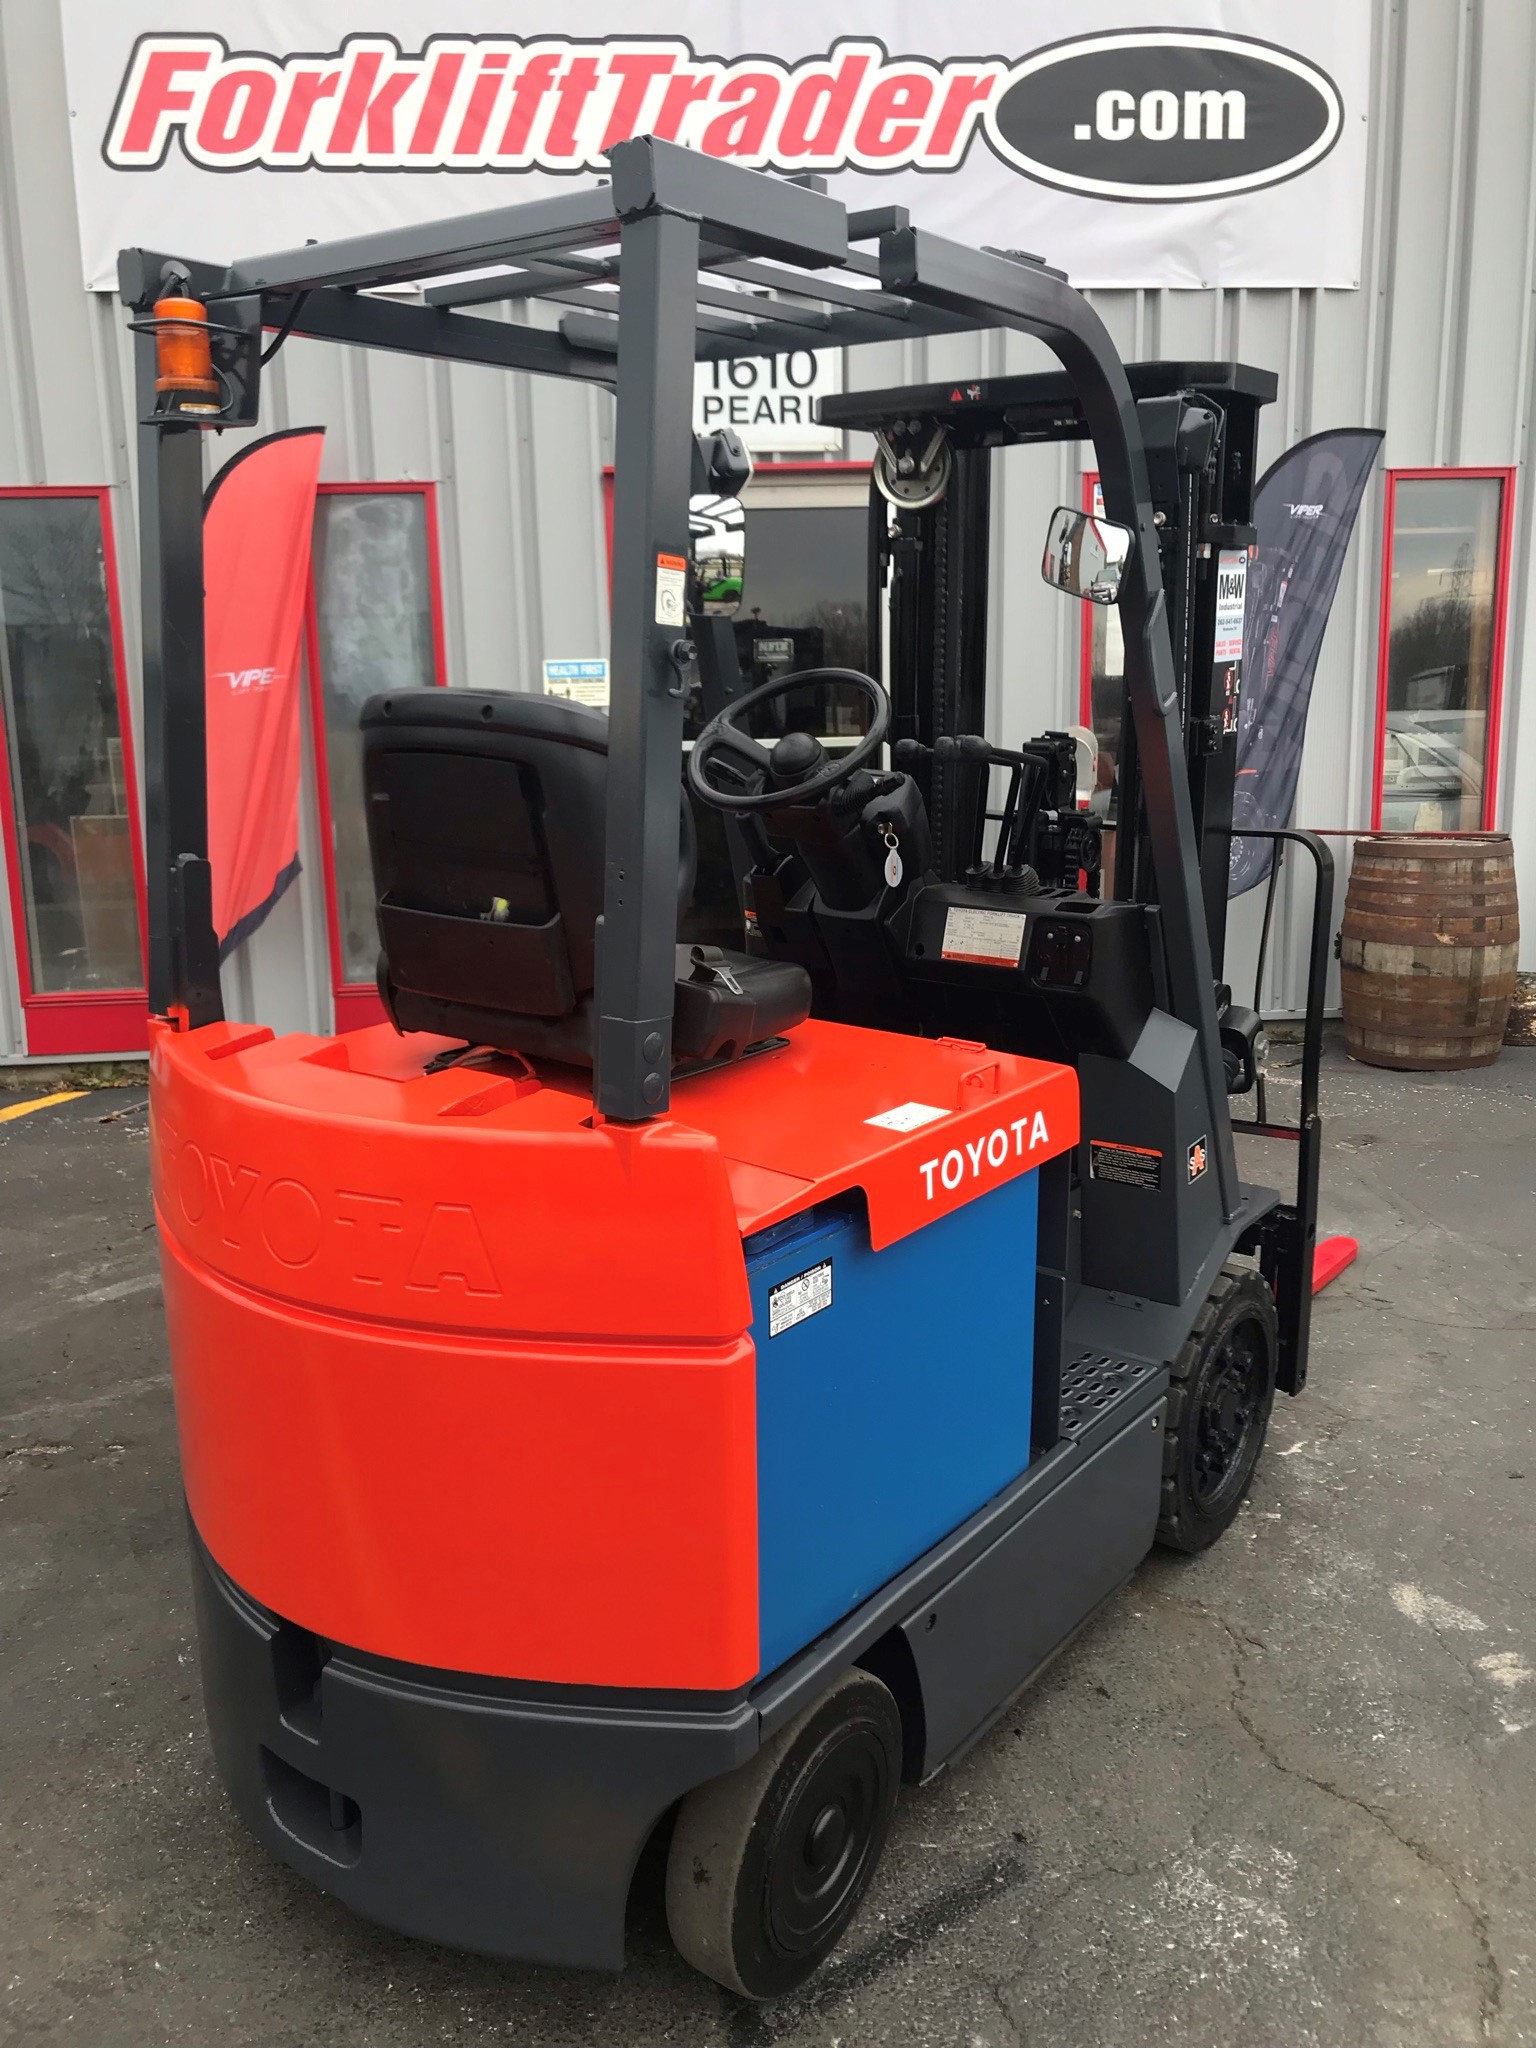 2009 toyota forklift with 189" lift height for sale